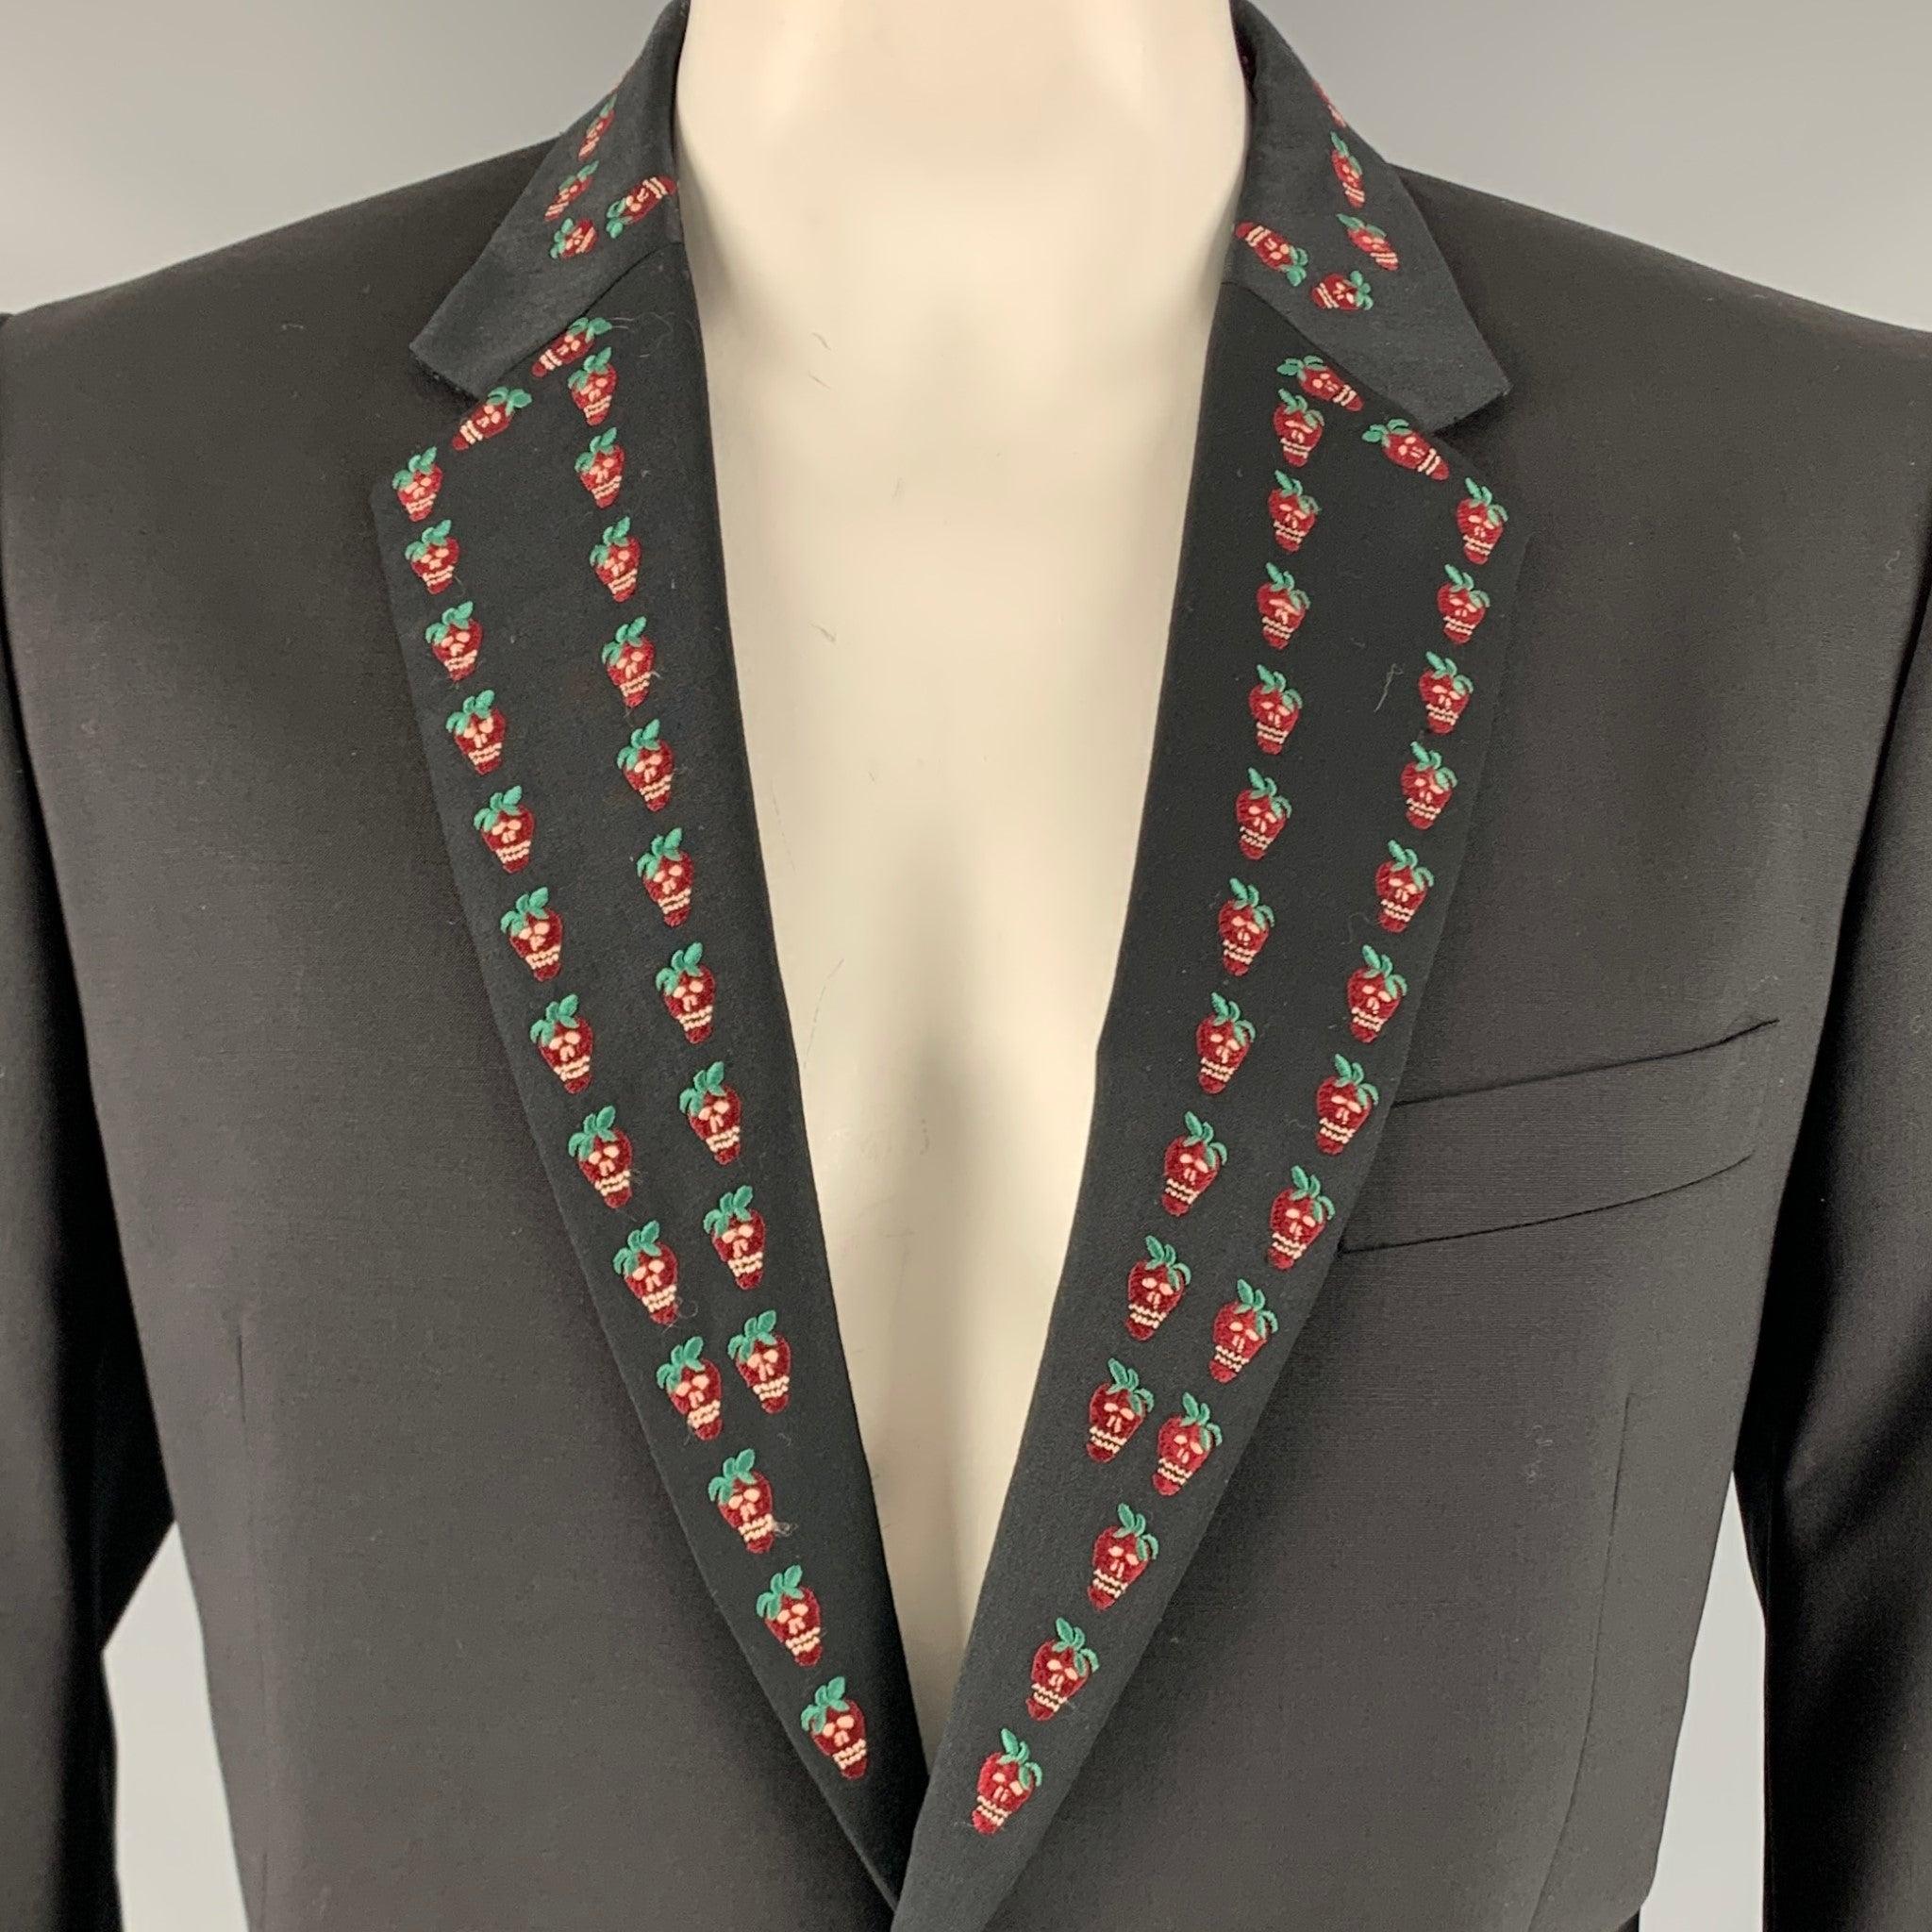 PAUL SMITH tuxedo sport coat
in a black wool blend featuring strawberry skull embroidery on notch lapel, double vented back, and single button closure. Made in Italy.Very Good Pre-Owned Condition. Minor signs of wear. 

Marked:   44R 

Measurements: